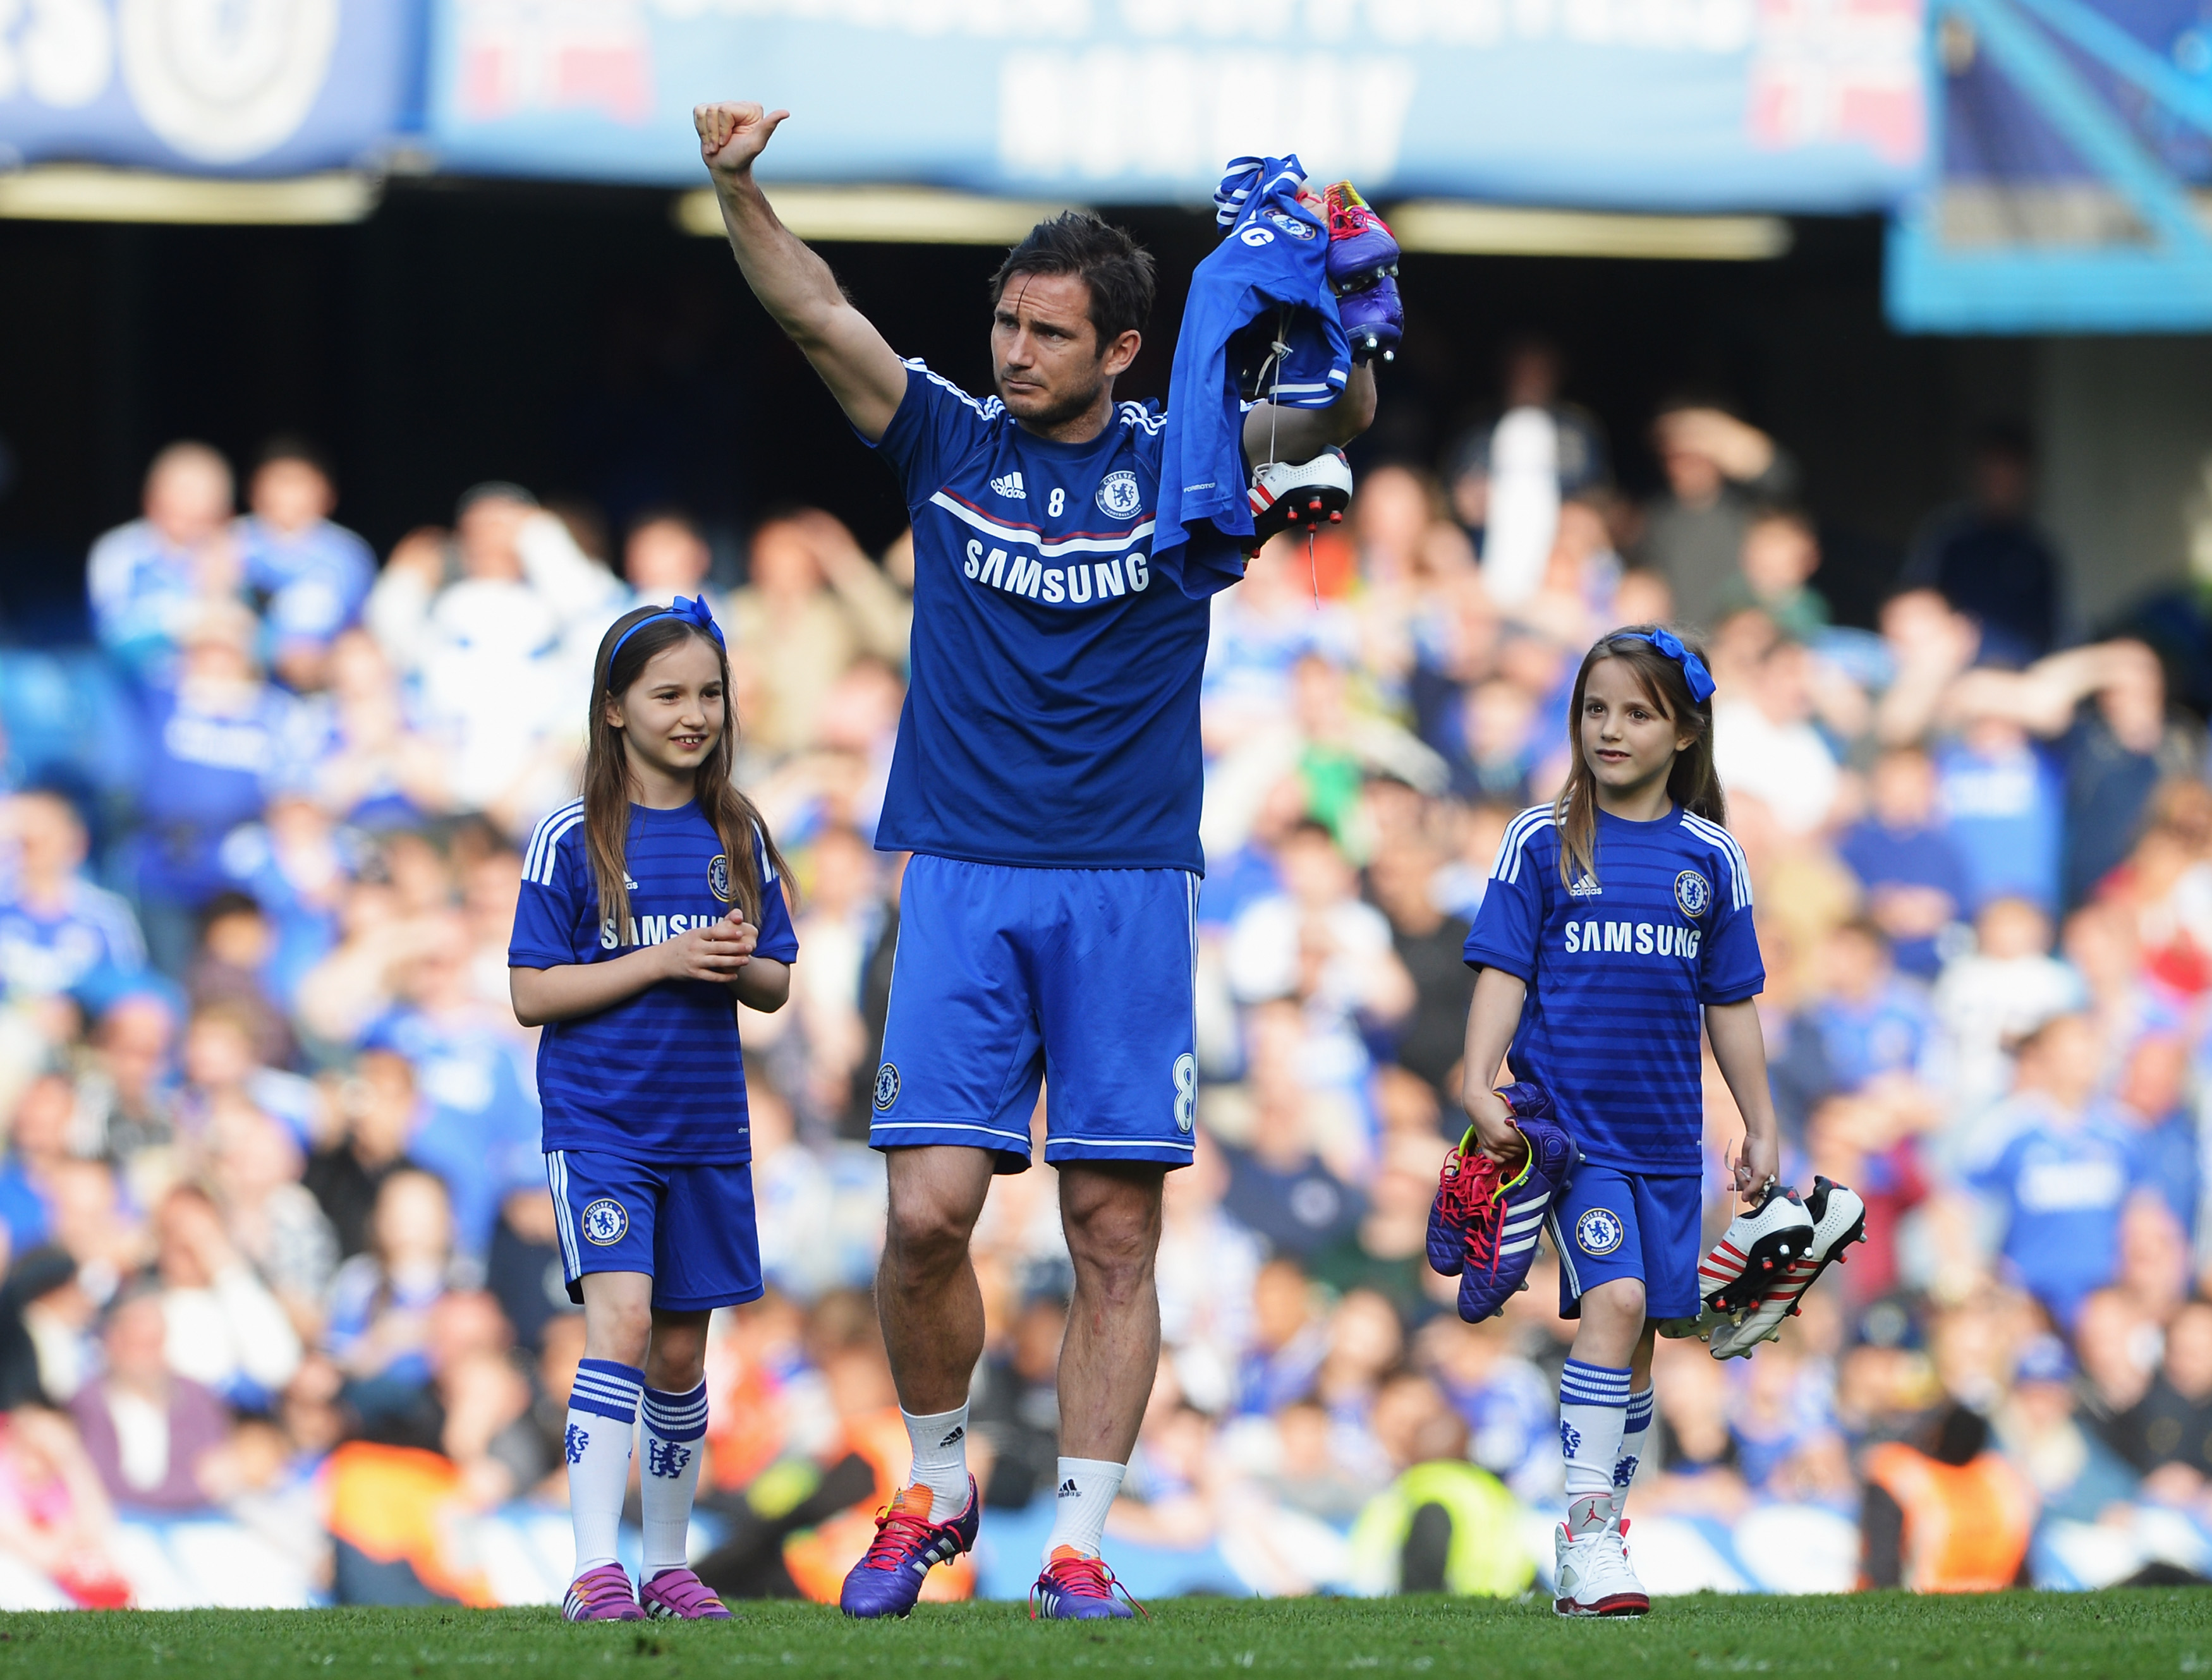 LONDON, ENGLAND - MAY 04:  Frank Lampard of Chelsea and his daughters Luna and Isla appear on the pitch following the Barclays Premier League match between Chelsea and Norwich City at Stamford Bridge on May 4, 2014 in London, England.  (Photo by Michael Regan/Getty Images)